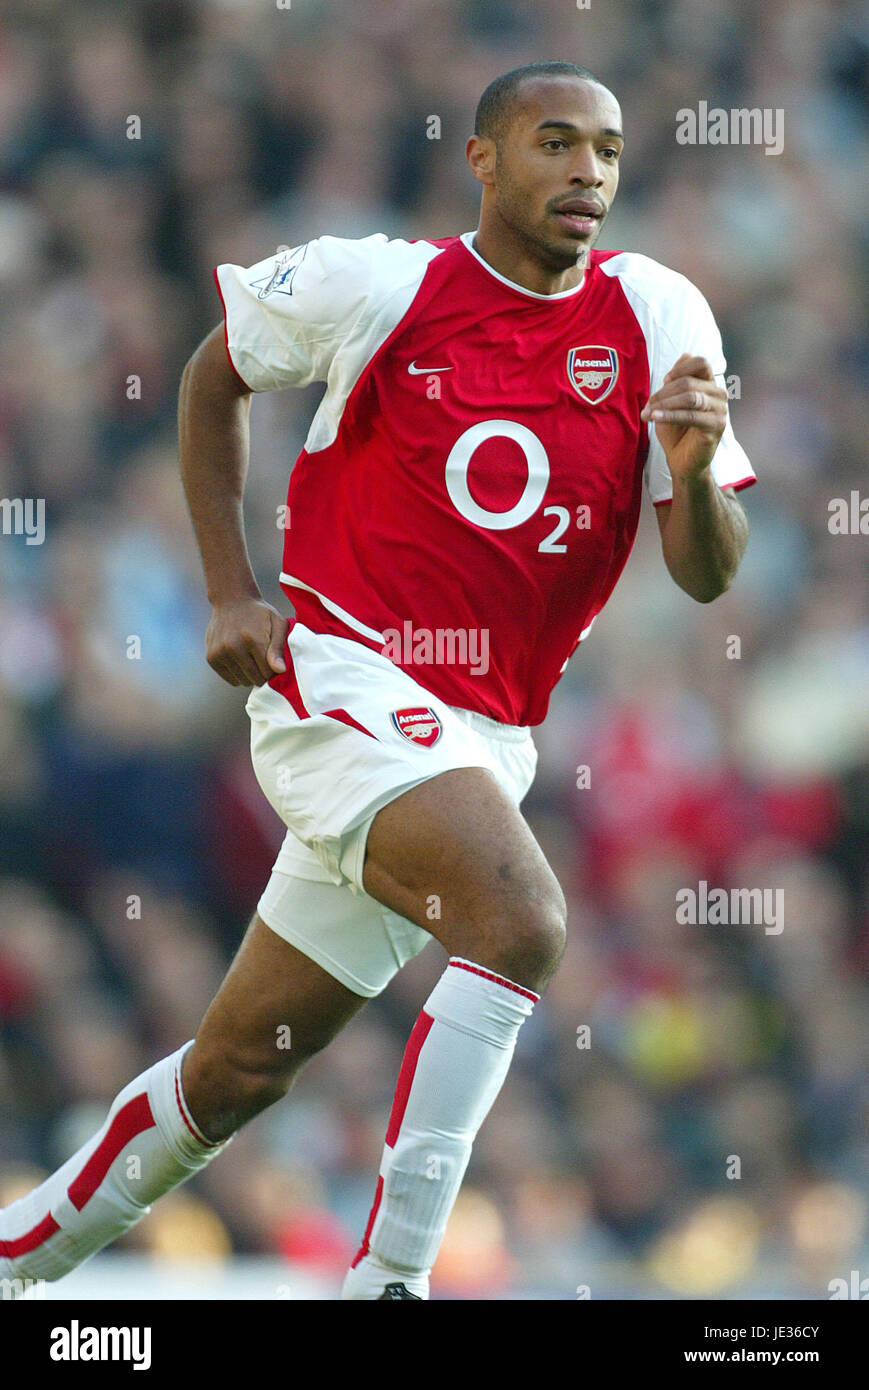 thierry henry arsenal jersey o2